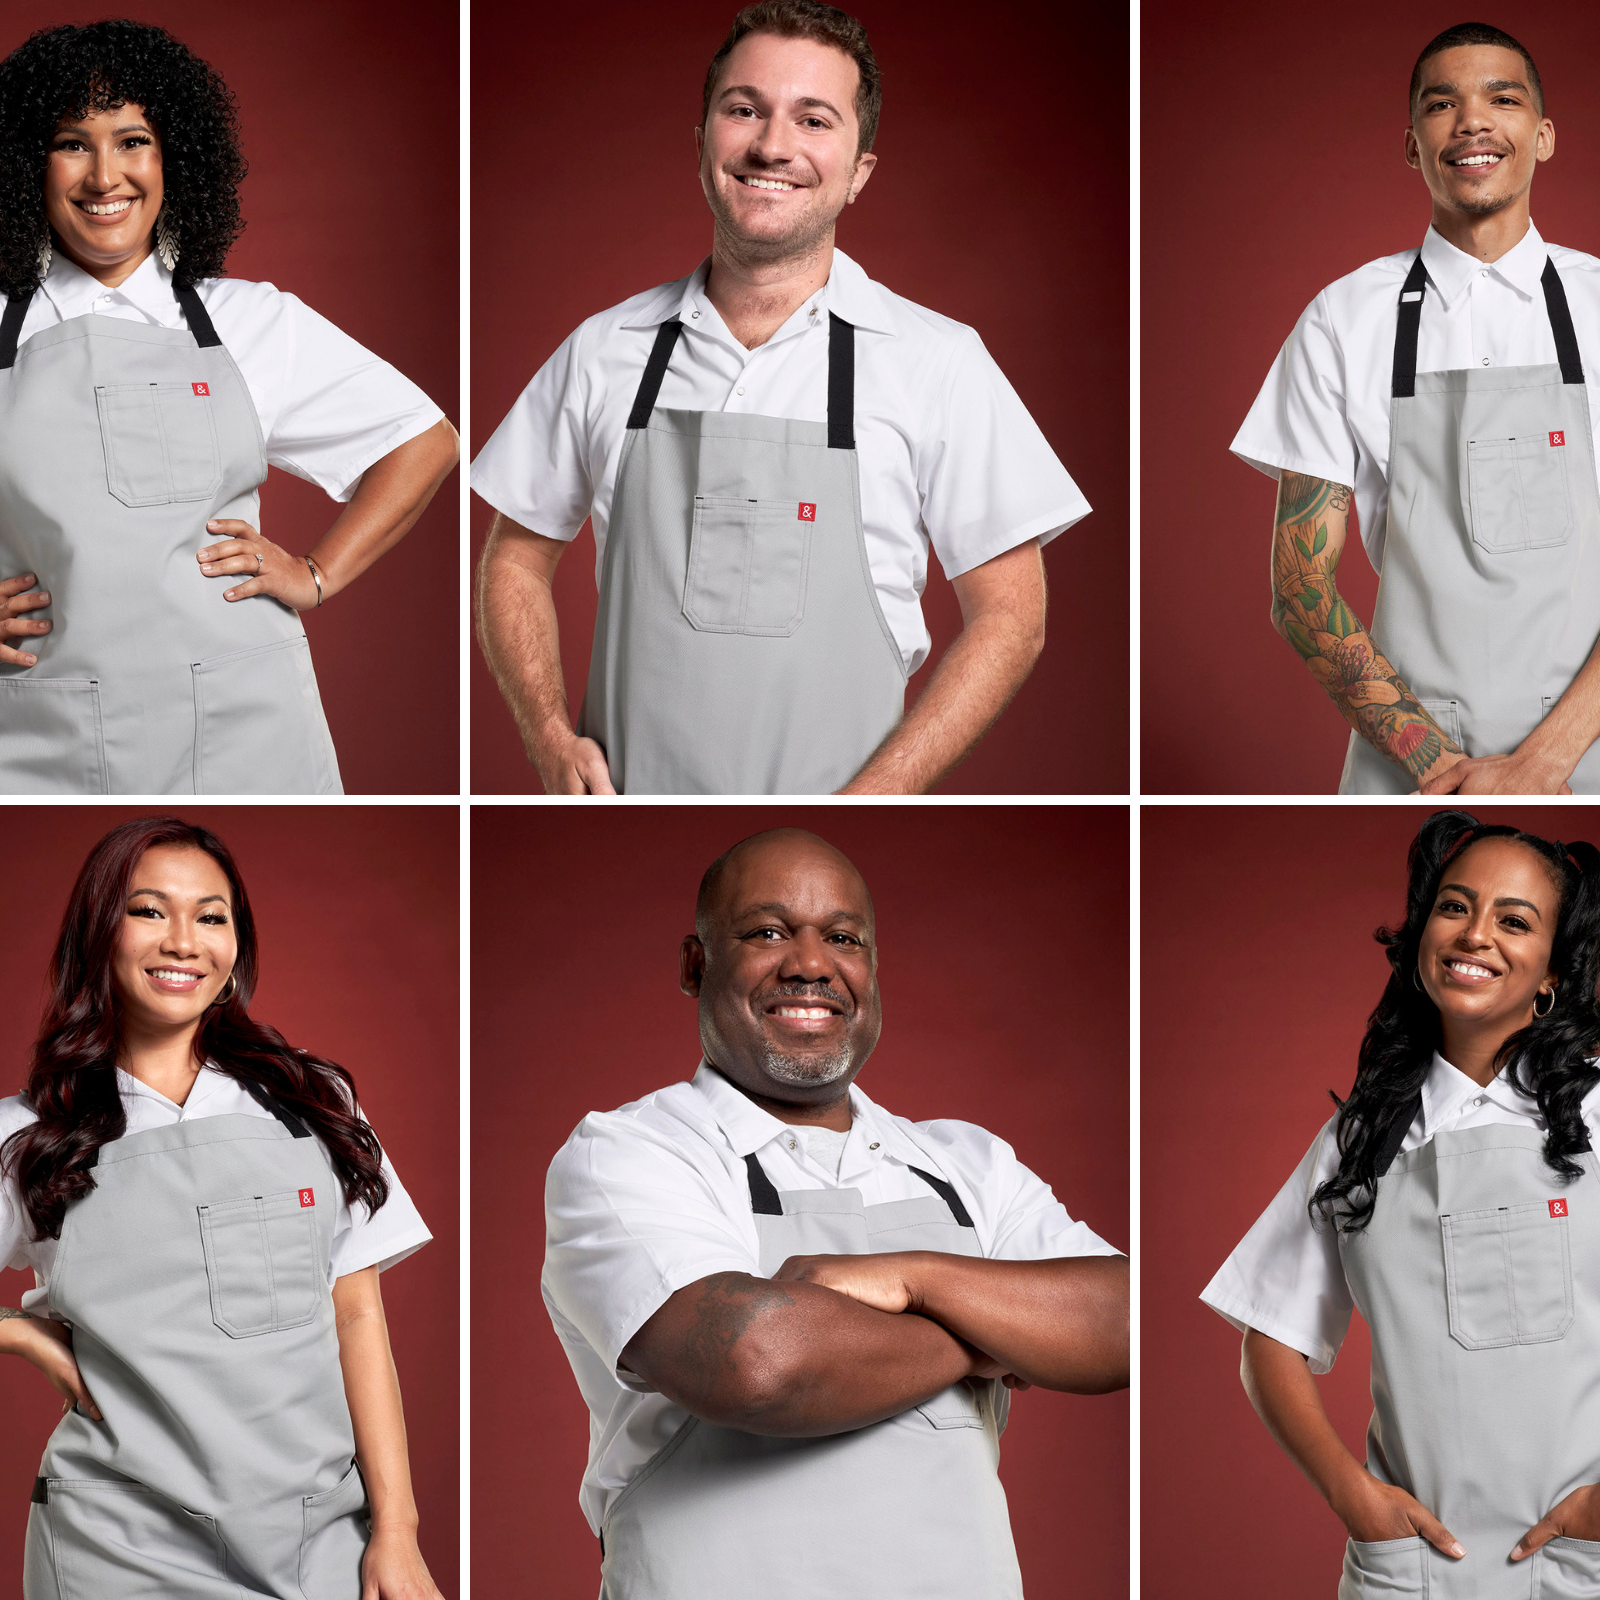 Meet the 'Next Level Chef' Cast Vying for Gordon Ramsay's Mentorship